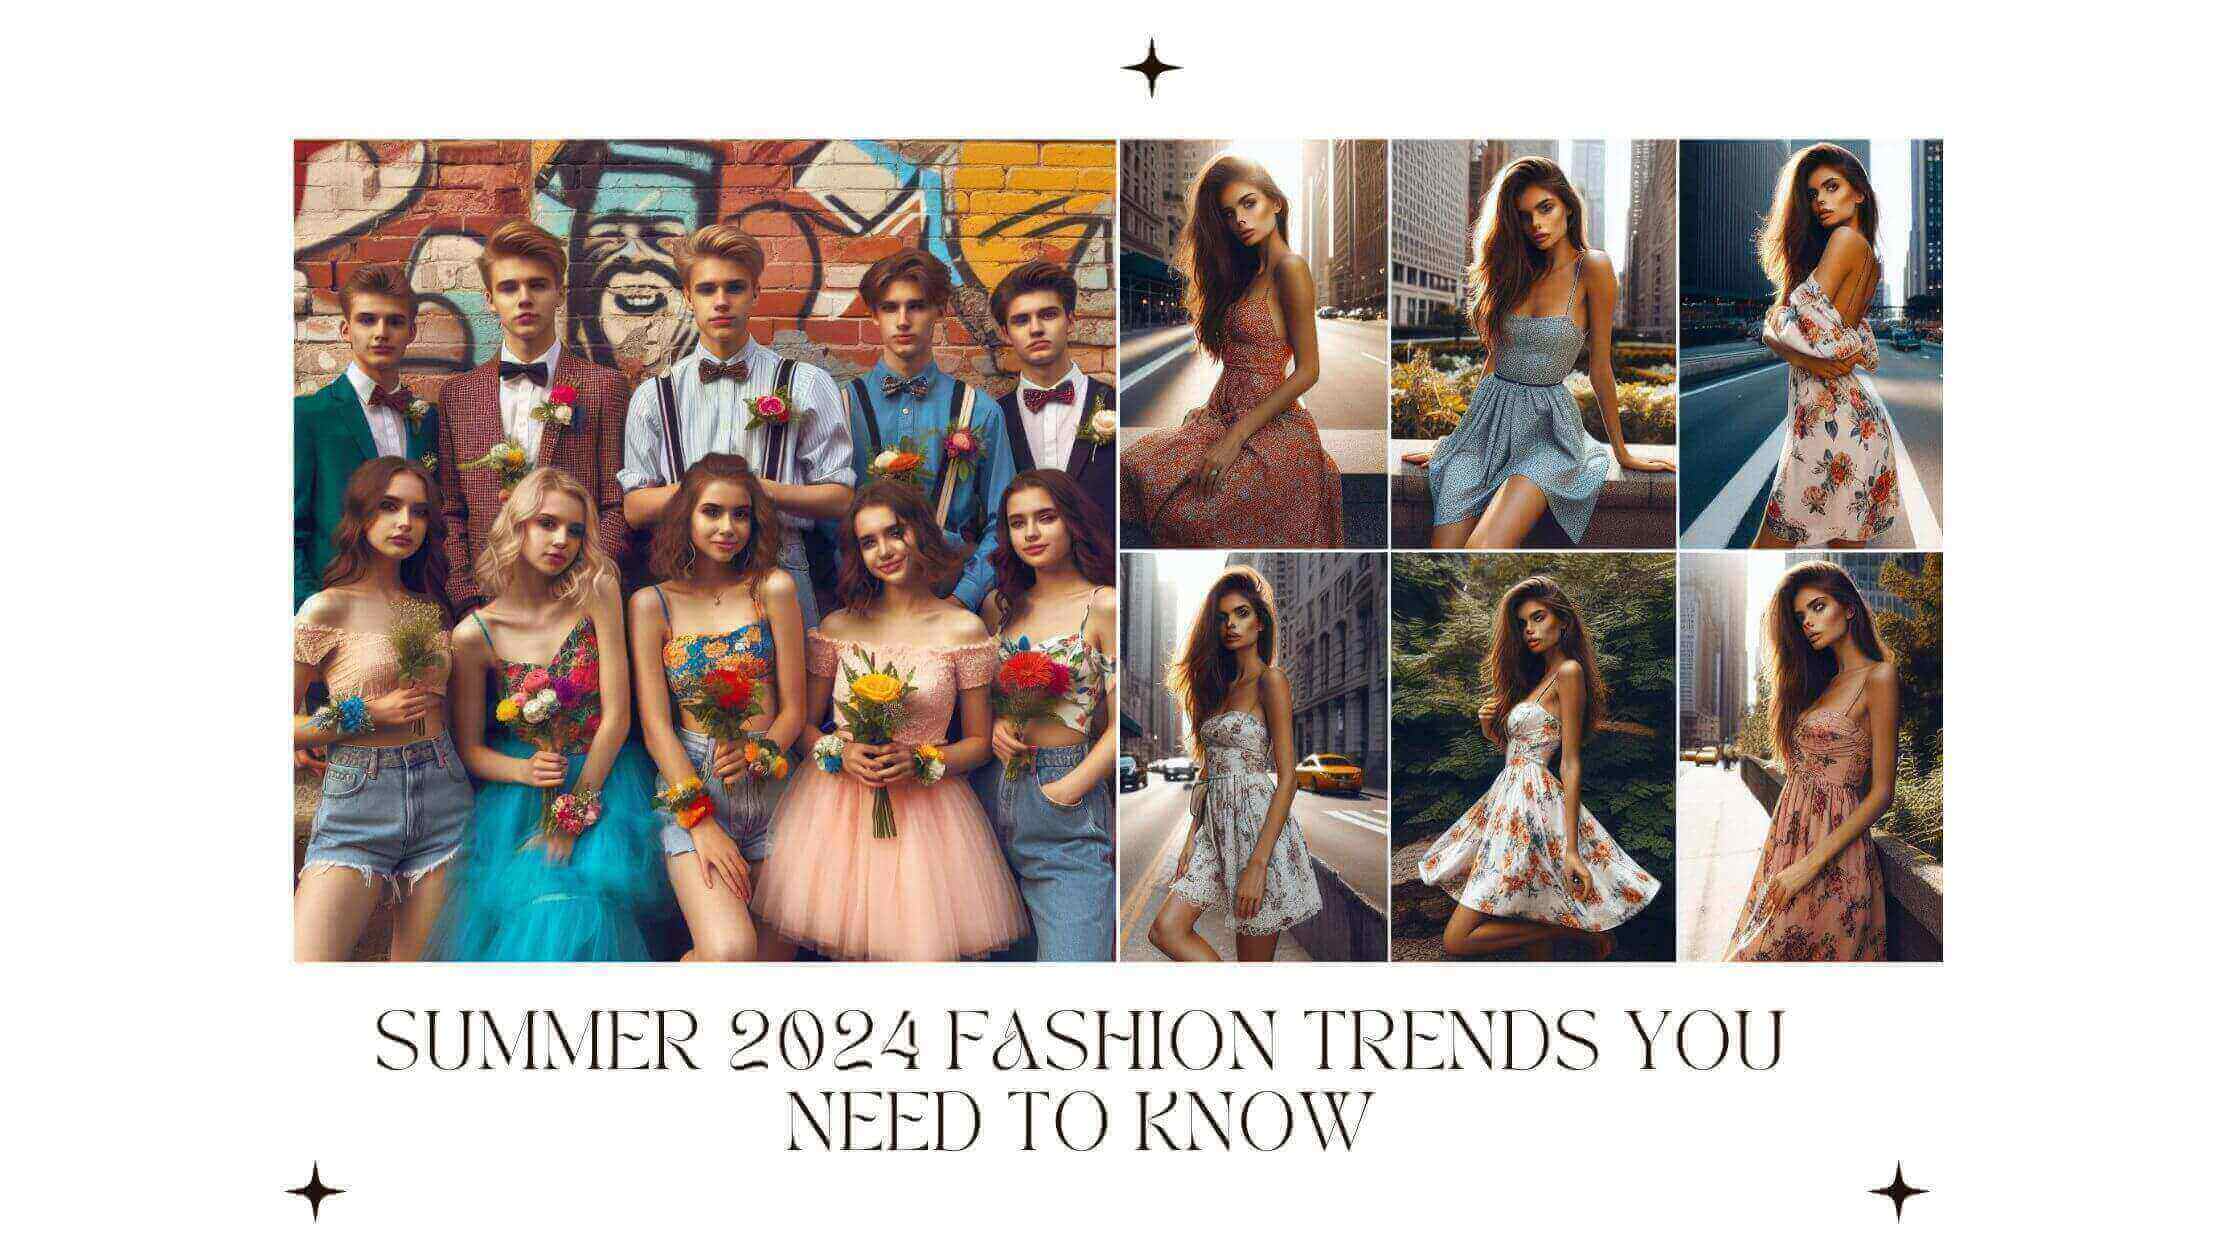 Summer 2024 Fashion Trends You Need to Know